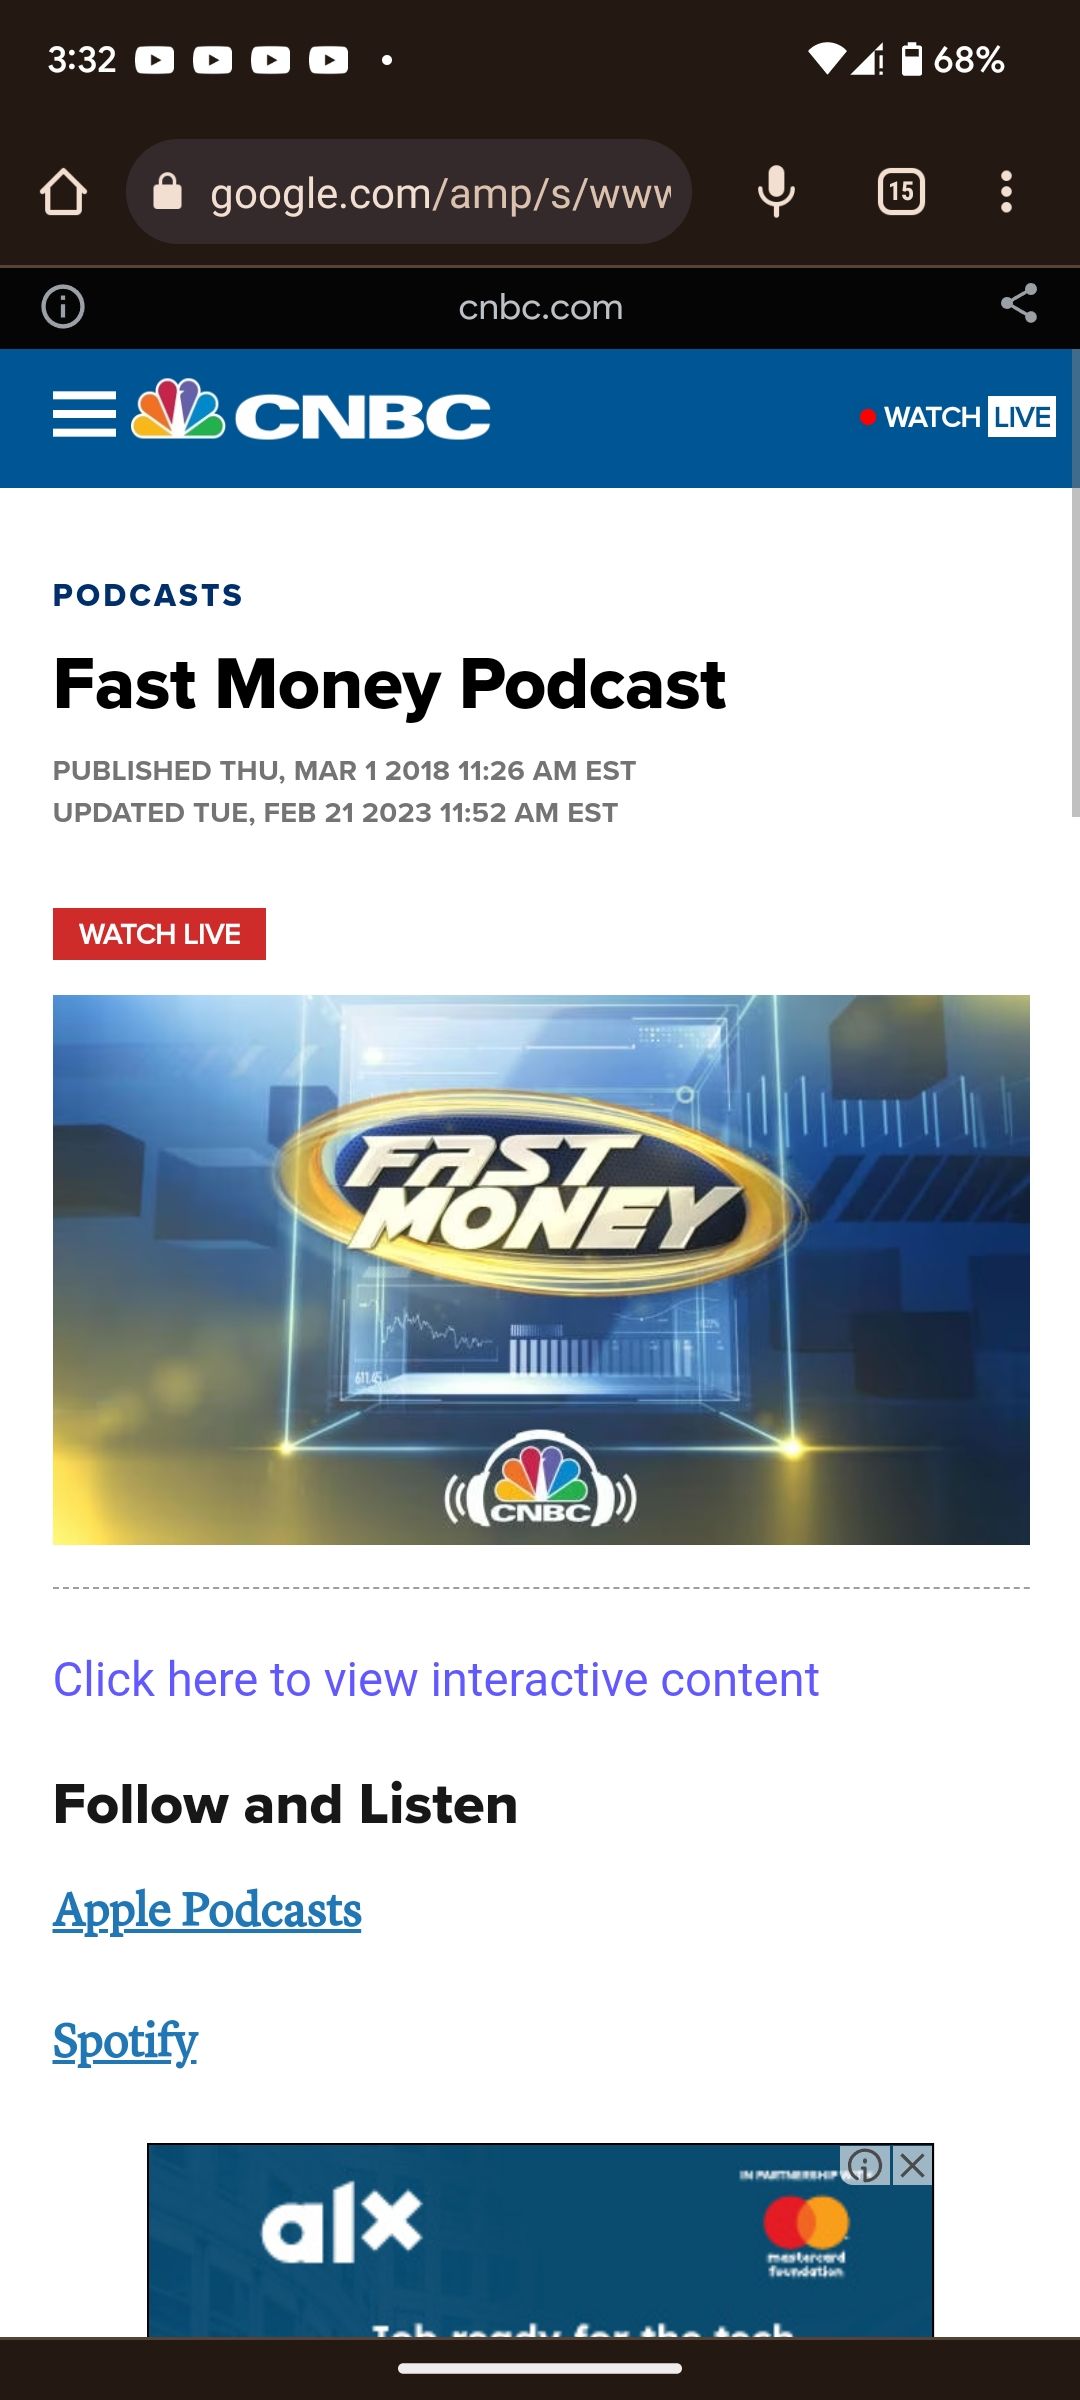 CNBC's Fast Money podcast homepage accessed via the website